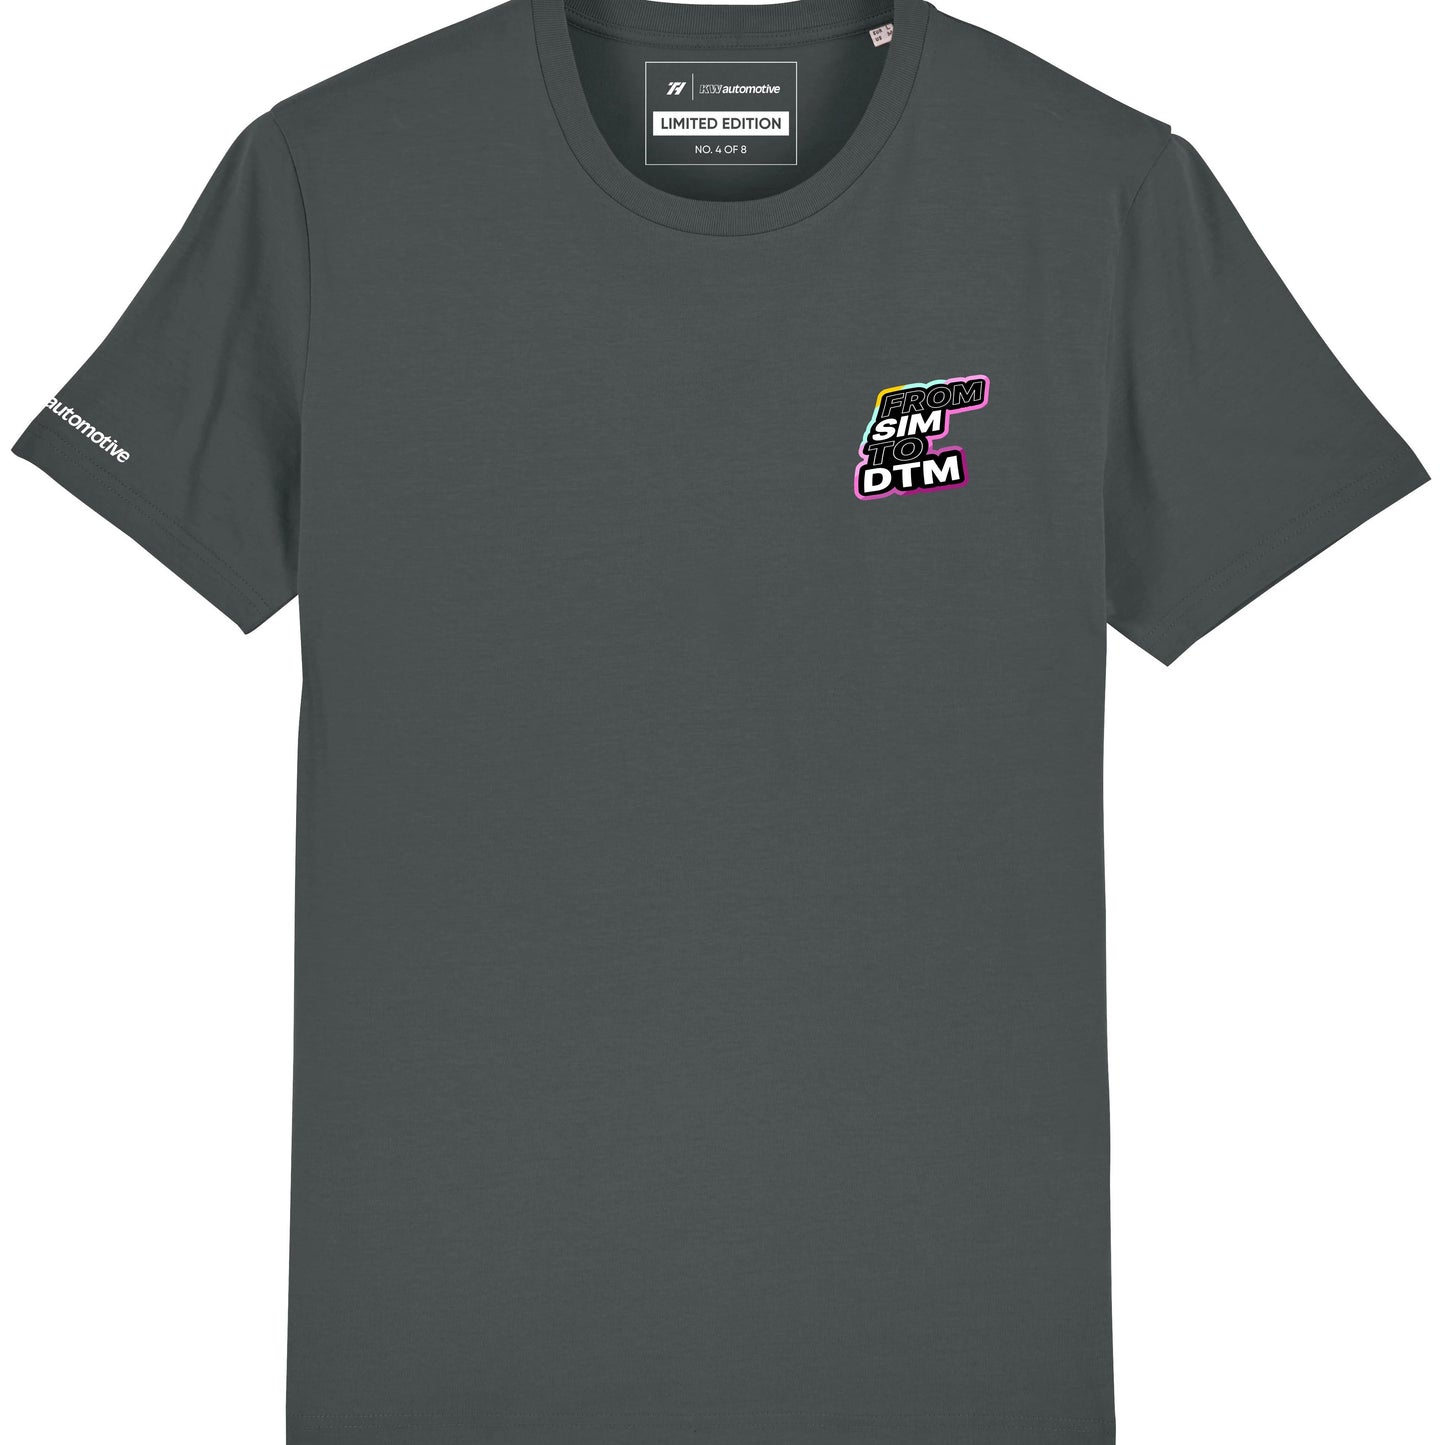 From Sim to DTM T-Shirt - Edition 4 Nürburgring